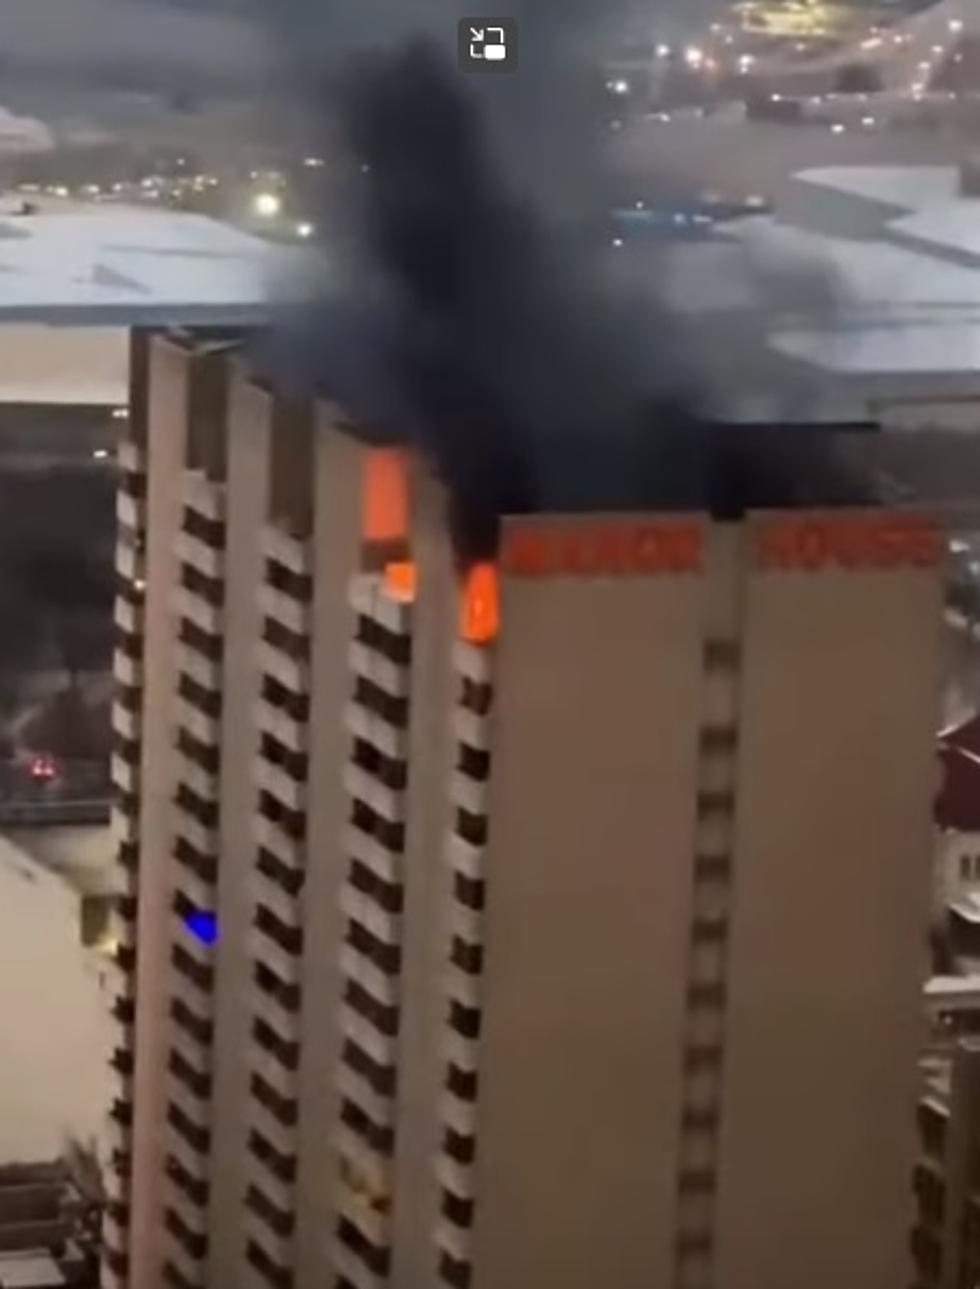 Dallas, Texas High Rise Burns When Someone Sets The Couch Ablaze